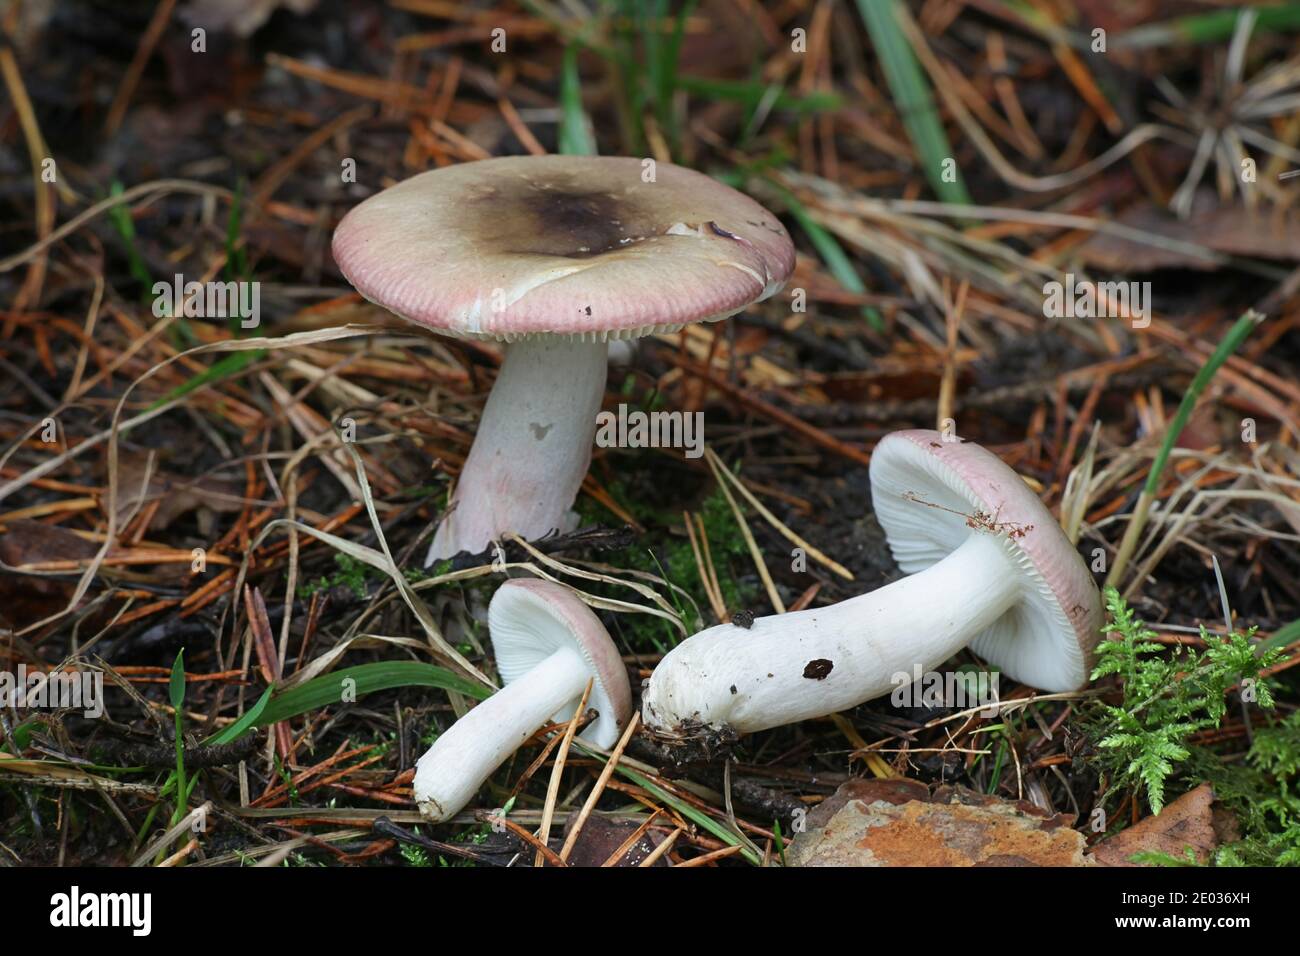 Russula gracillima, commonly known as the slender brittlegill, wild mushroom from Finland Stock Photo